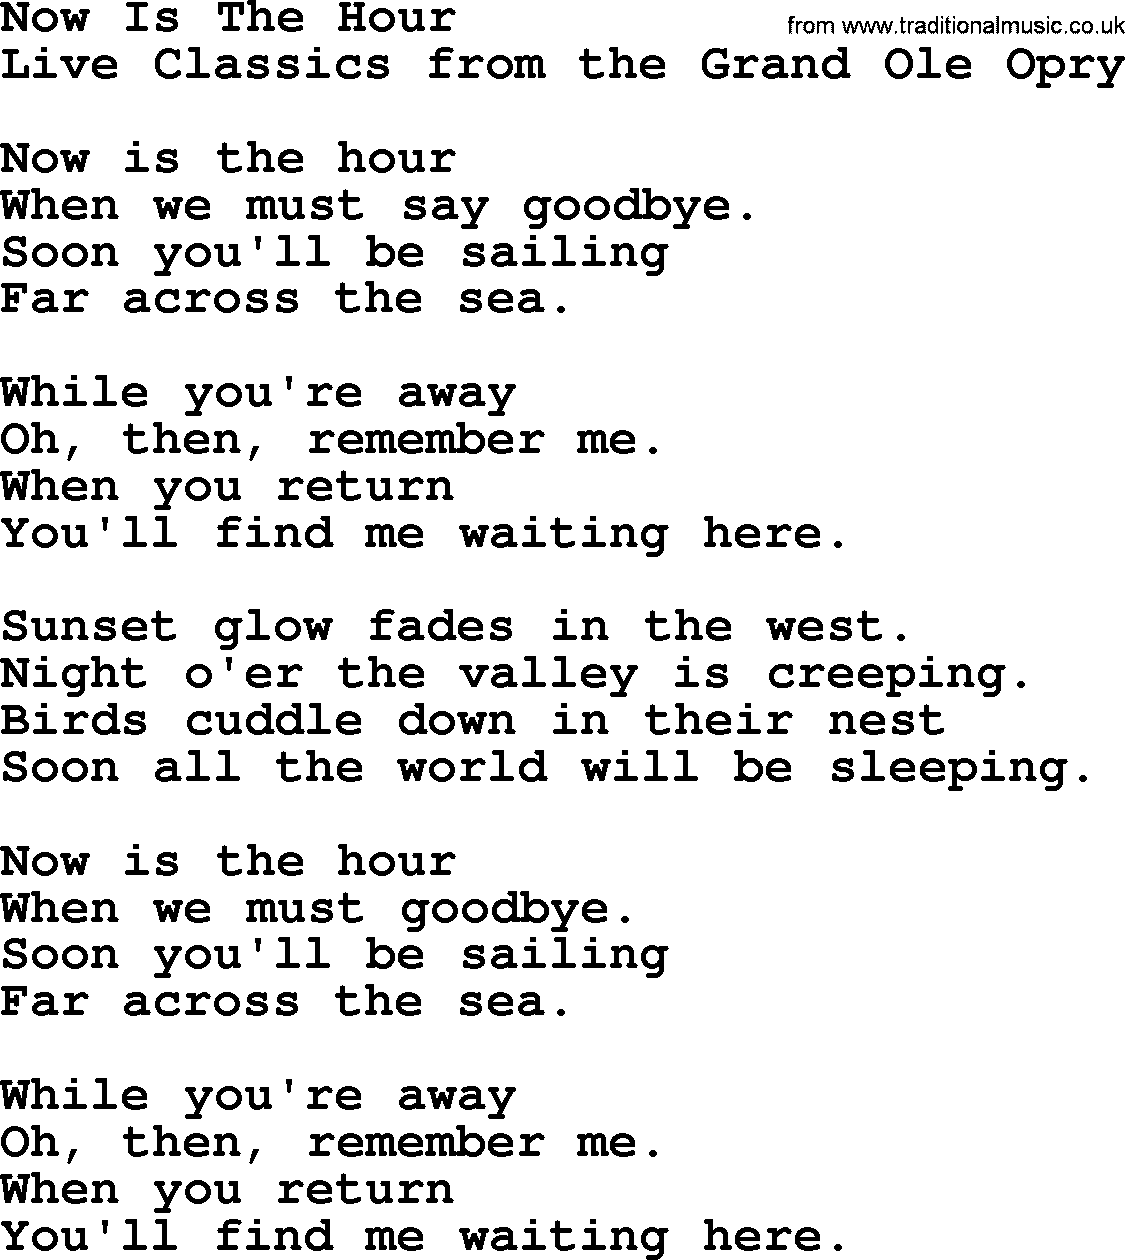 Marty Robbins song: Now Is The Hour, lyrics